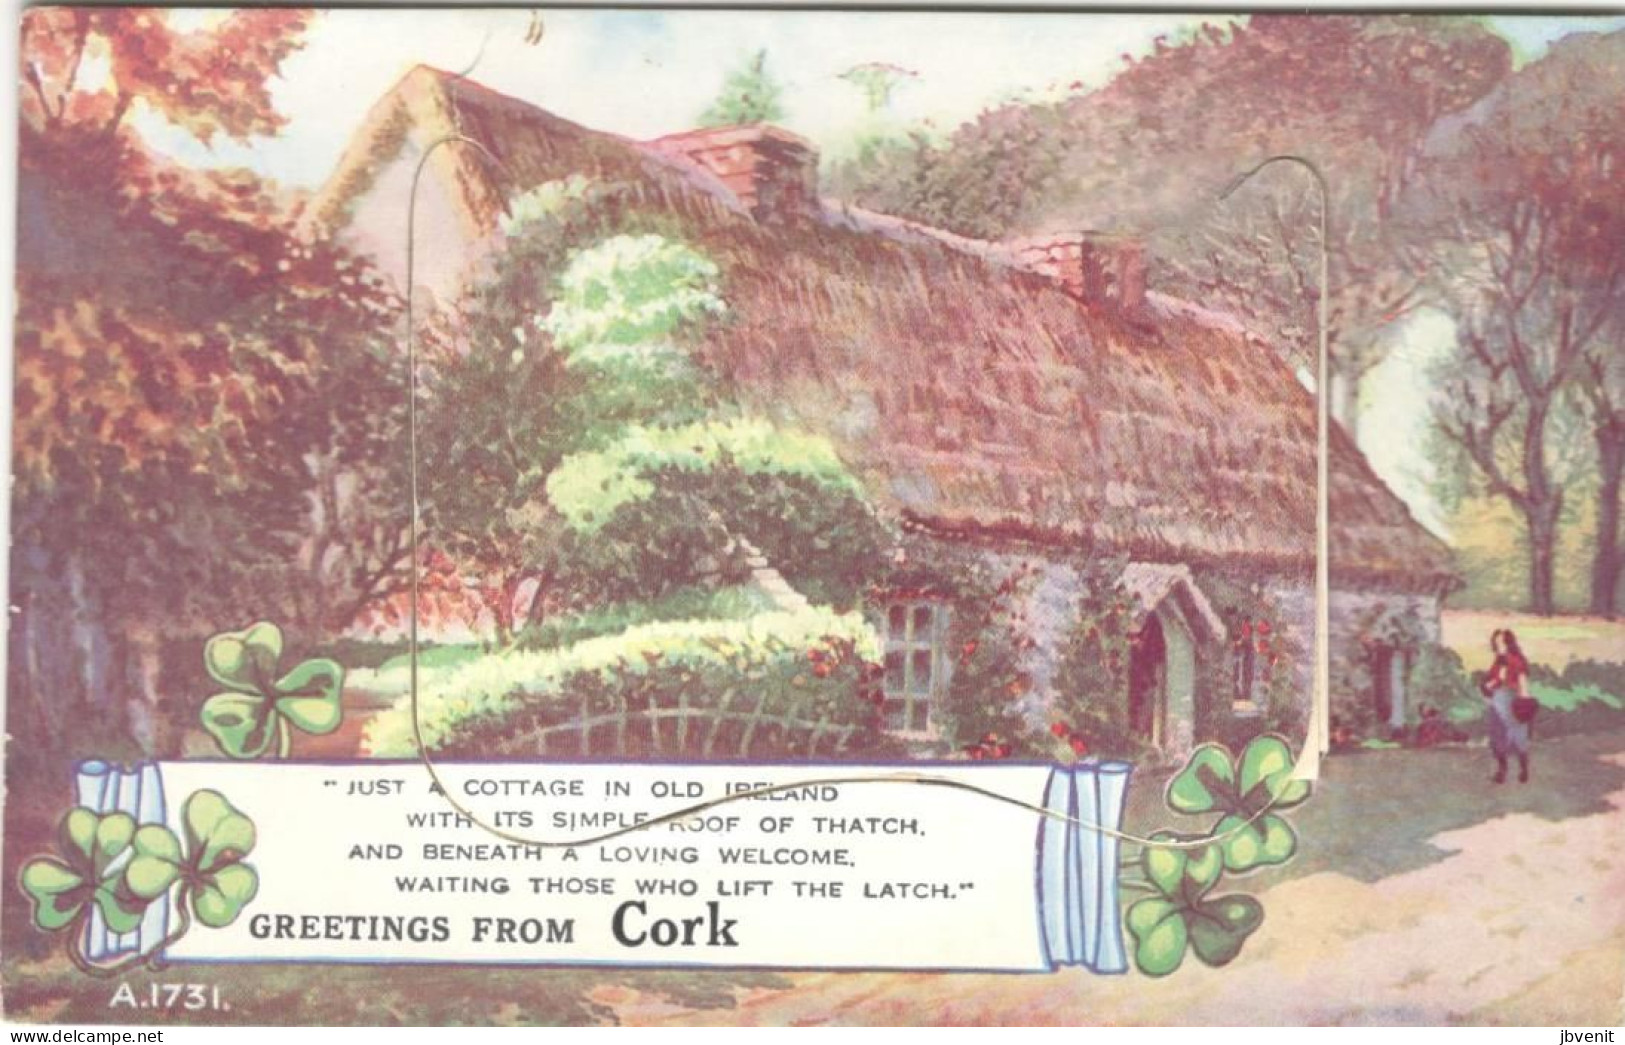 Greetings From CORK  - A COTTAGE IN OLD IRELAND - Cork